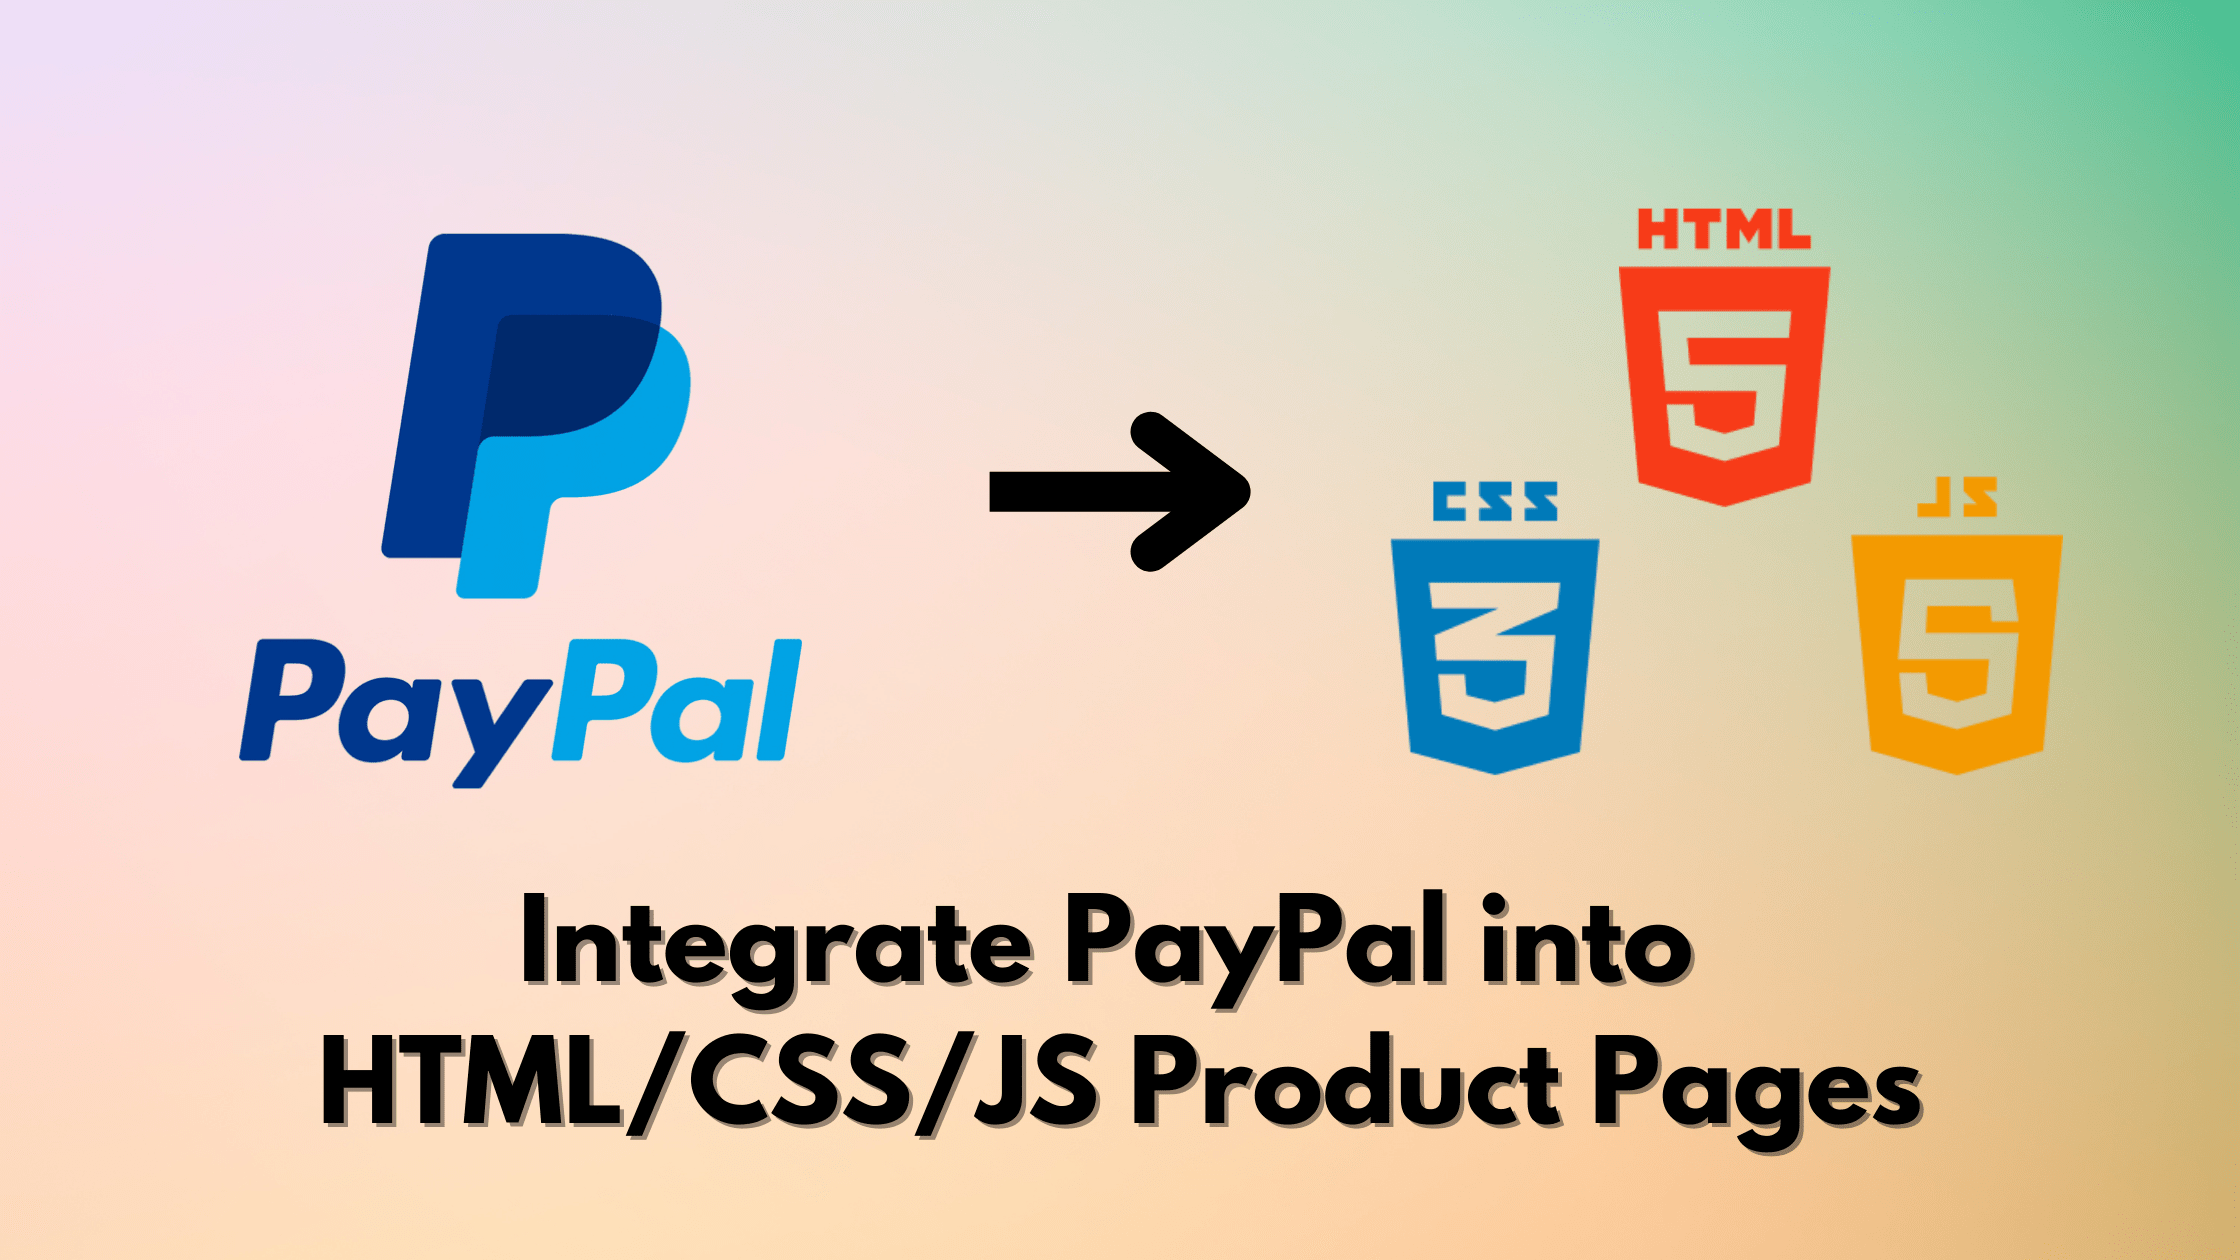 How to Integrate PayPal into Your HTML, CSS, and JS Product Pages